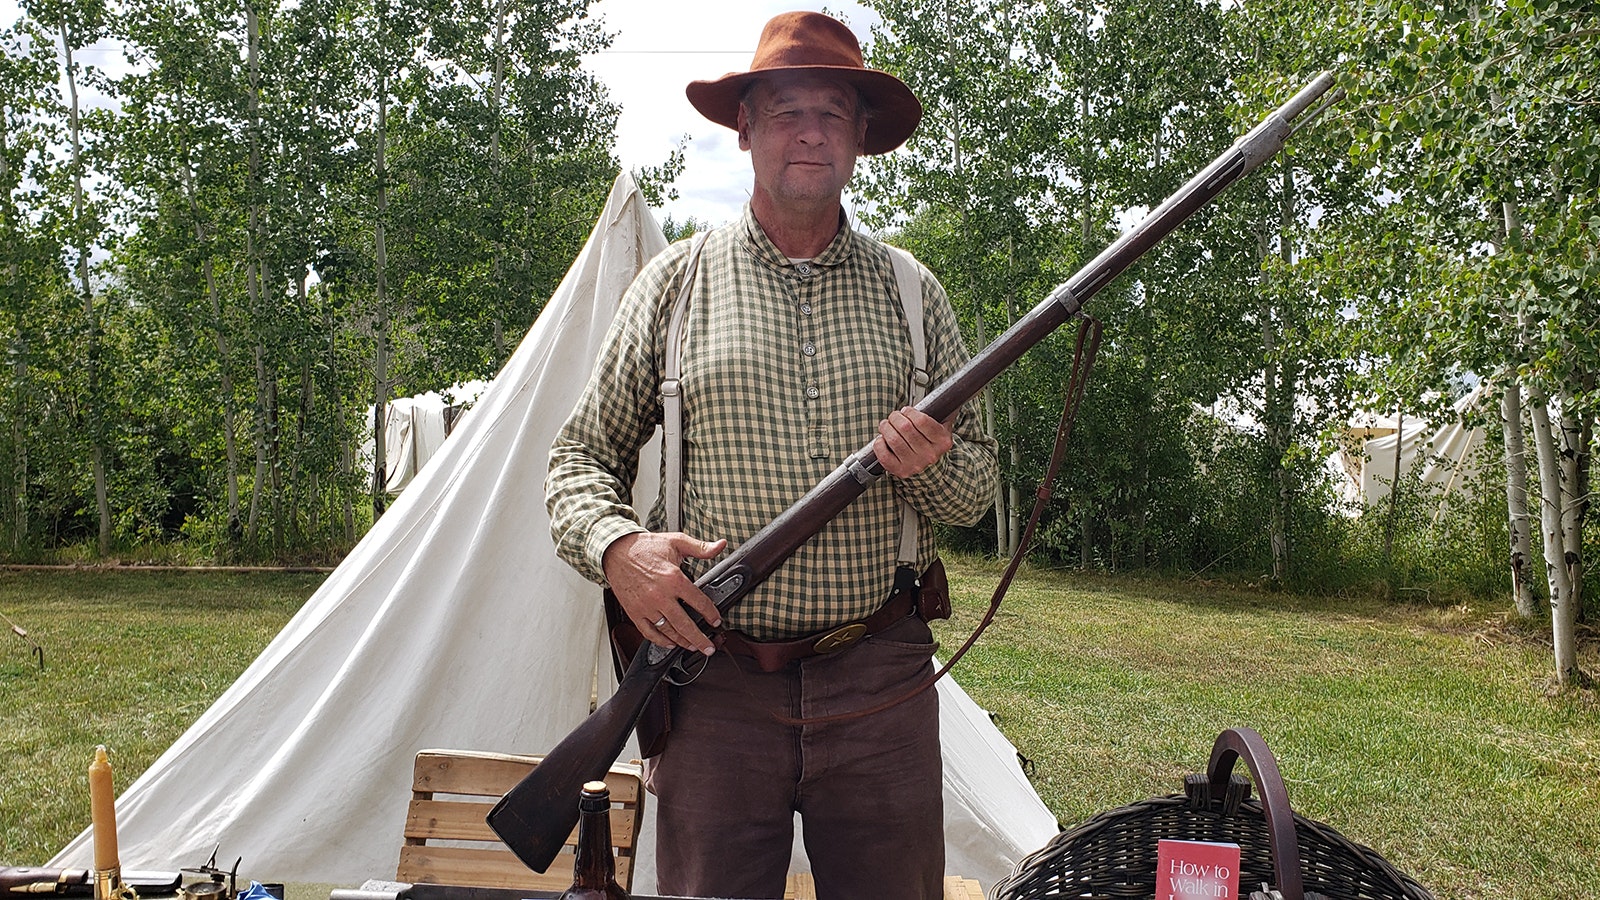 Karl Falken with the 1832 Harpers Ferry conversion musket he uses as an icebreaker for his historical display at the Fort Bridger Rendezvous.